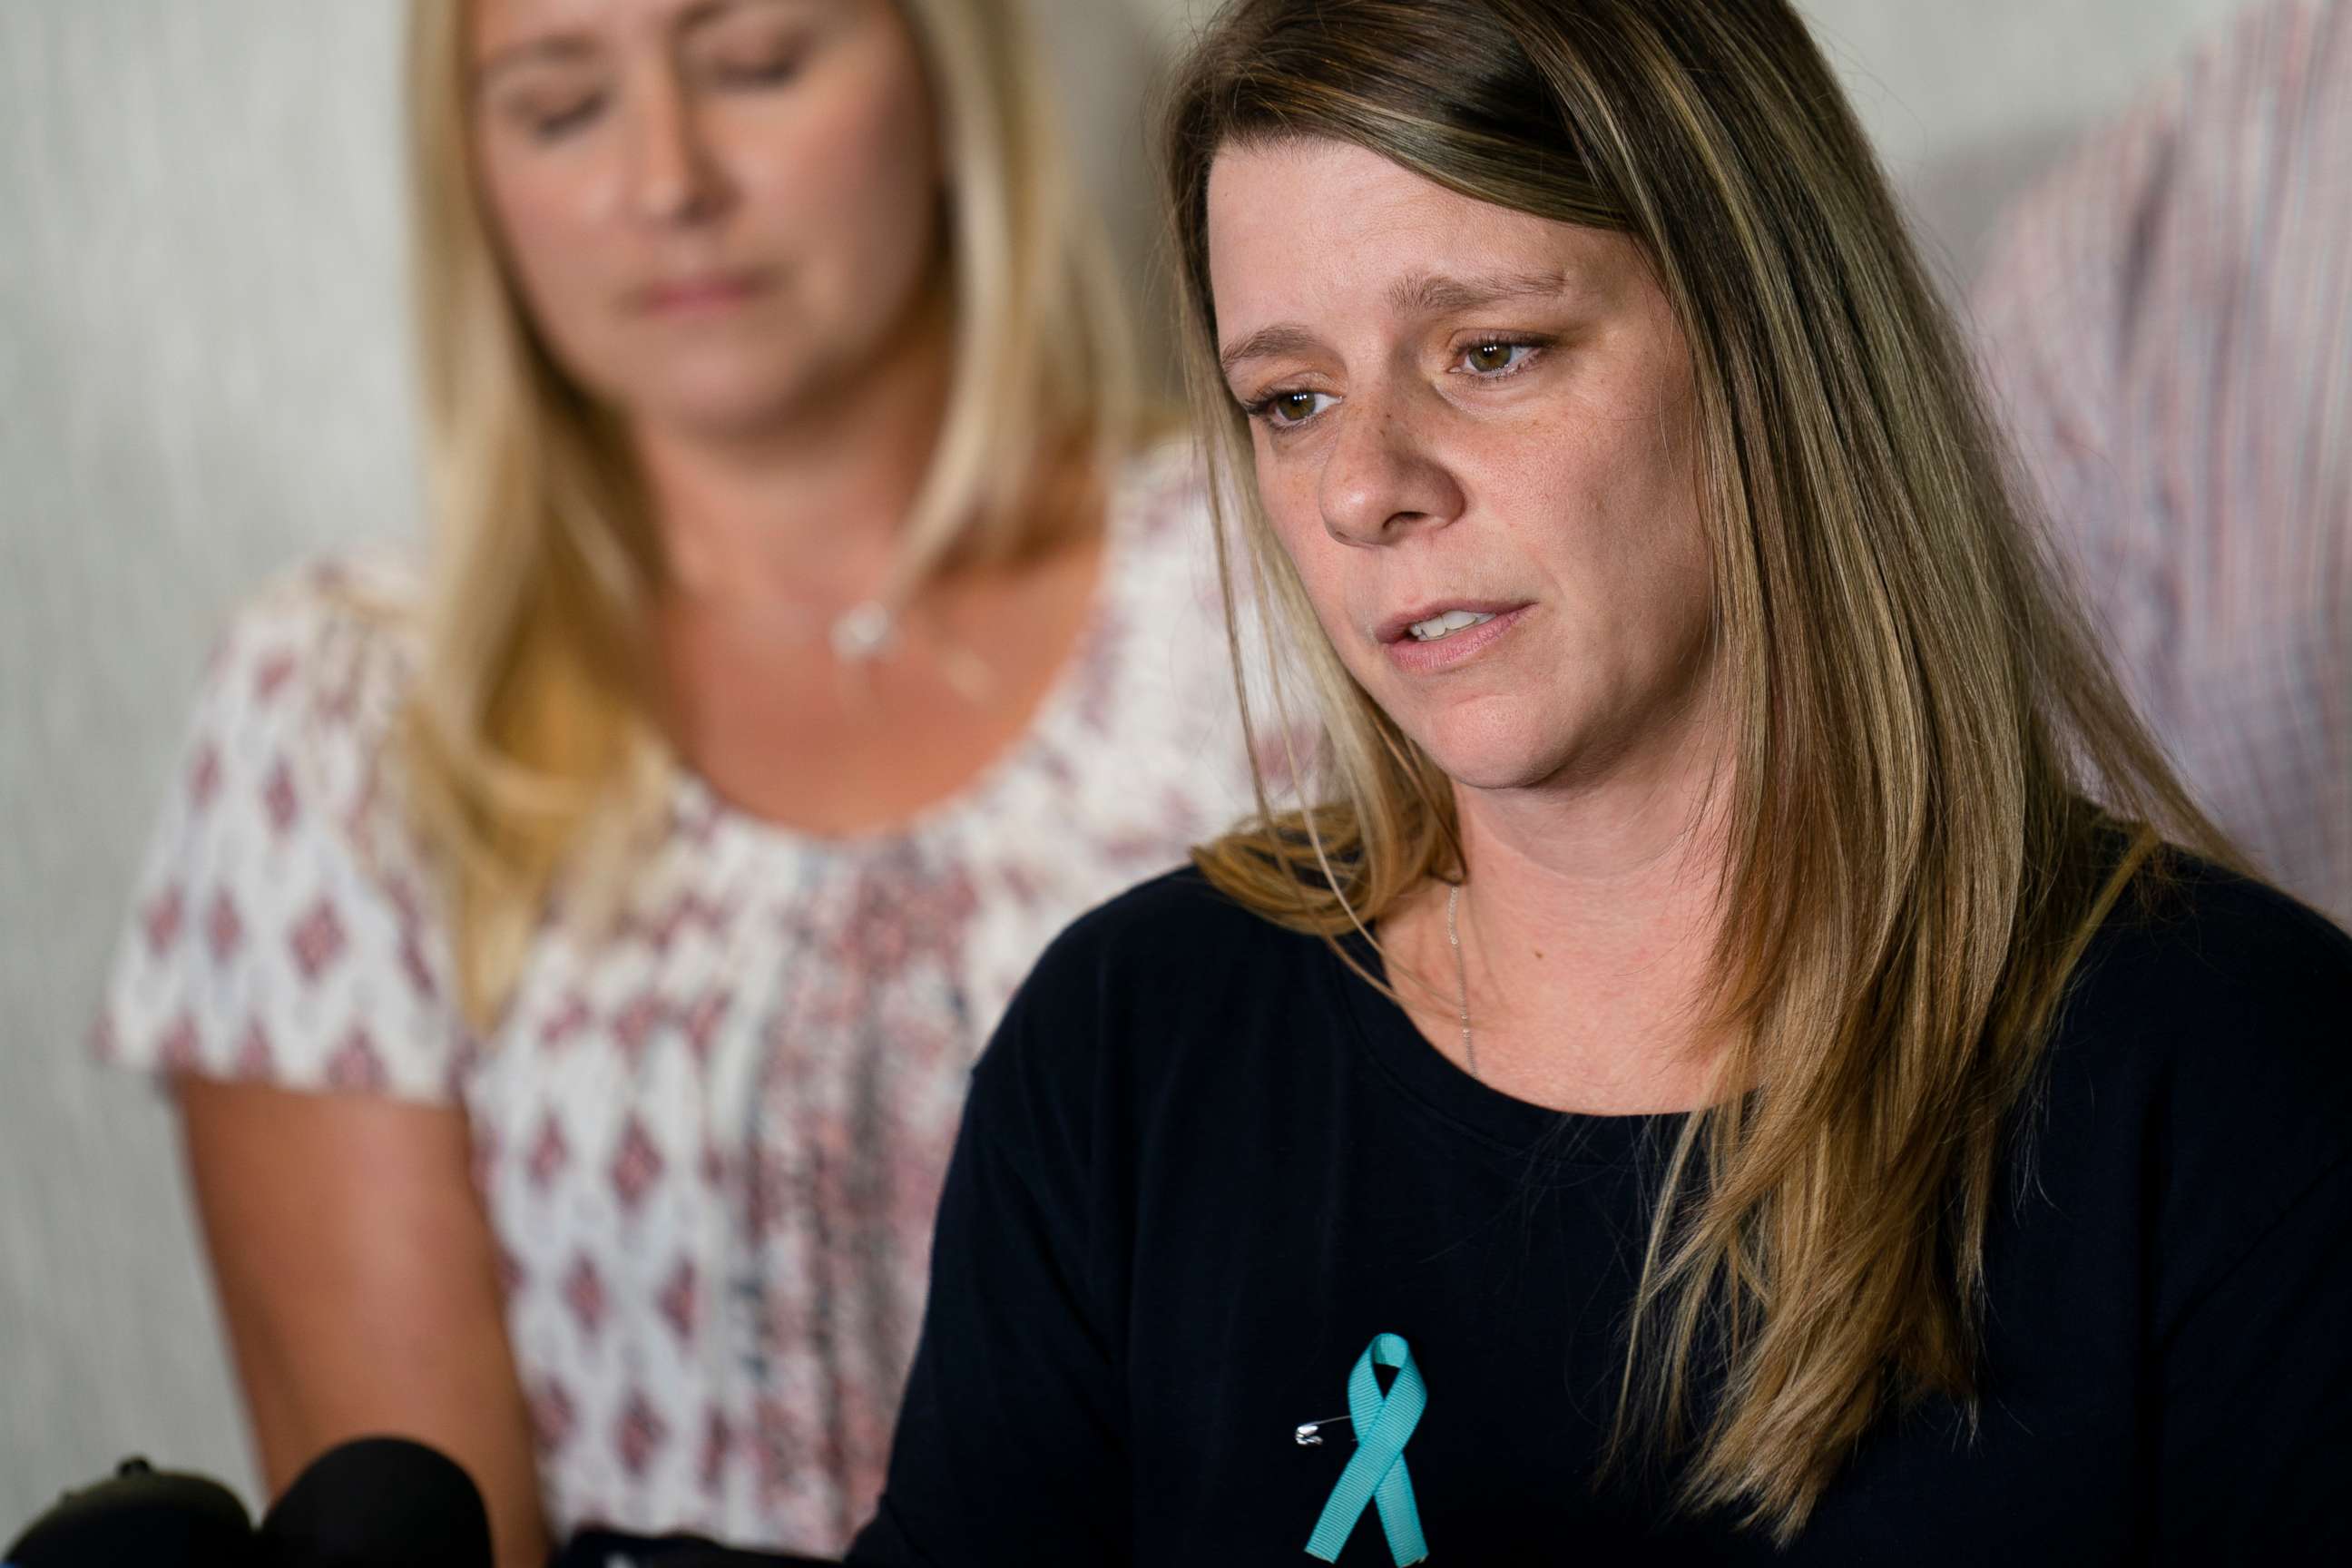 PHOTO: Nicole Schmidt, mother of Gabby Petito, whose death on a cross-country trip has sparked a manhunt for her boyfriend Brian Laundrie, speaks during a news conference, Sept. 28, 2021, in Bohemia, N.Y.